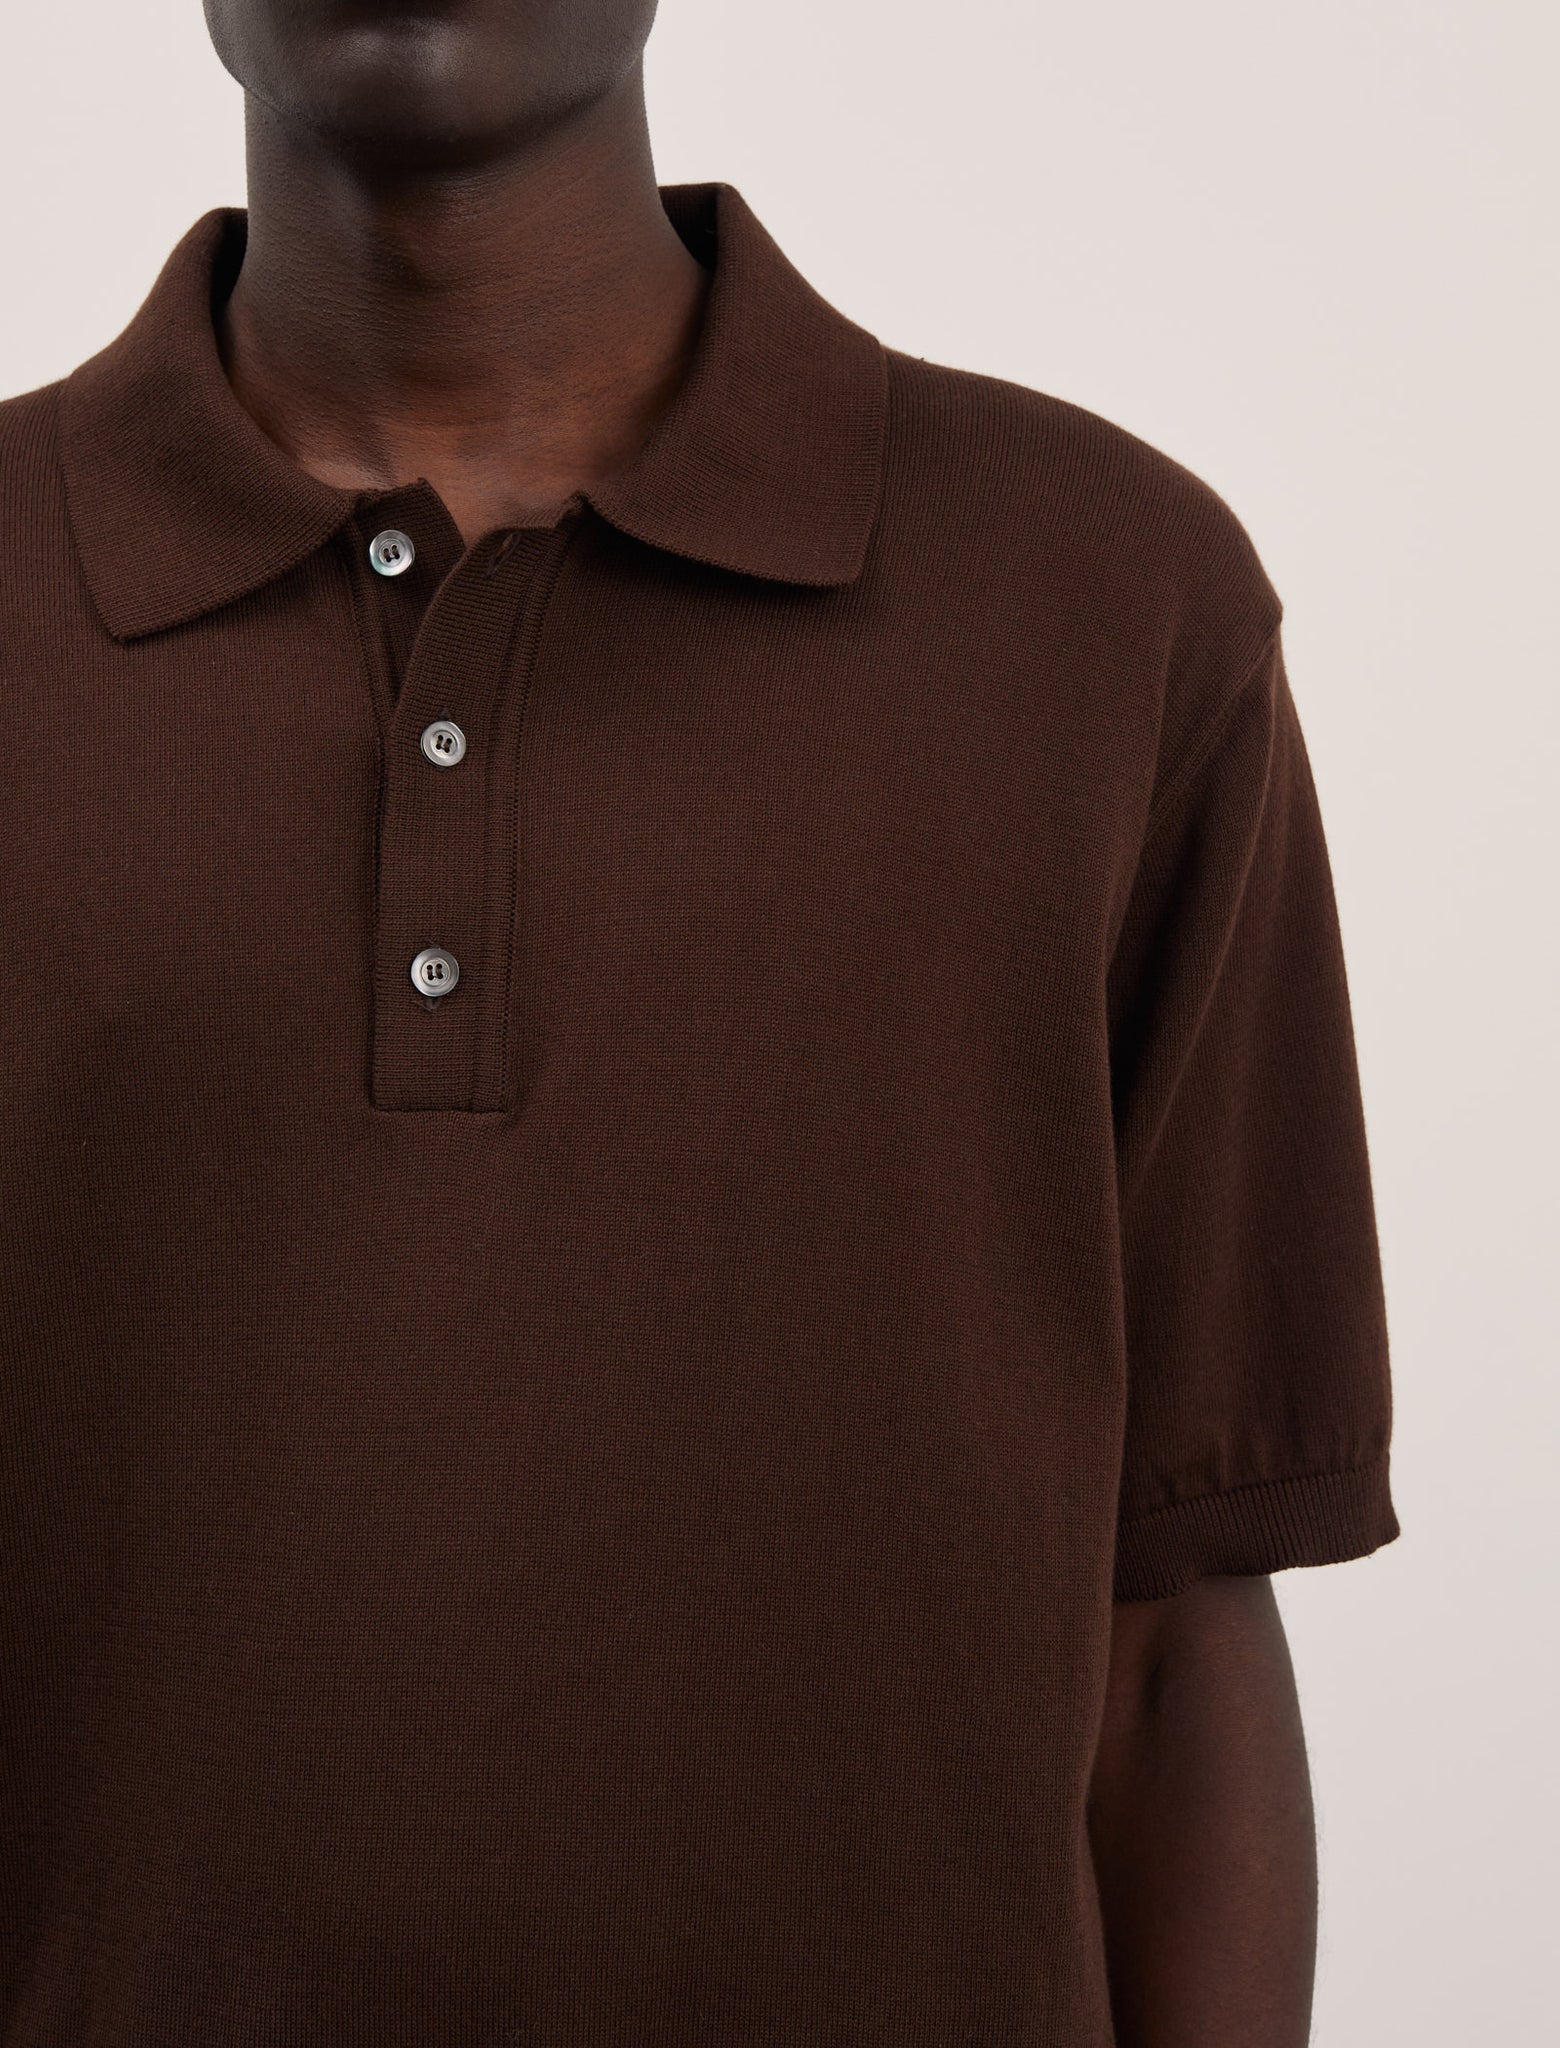 ANOTHER Polo Shirt 3.0, Brown